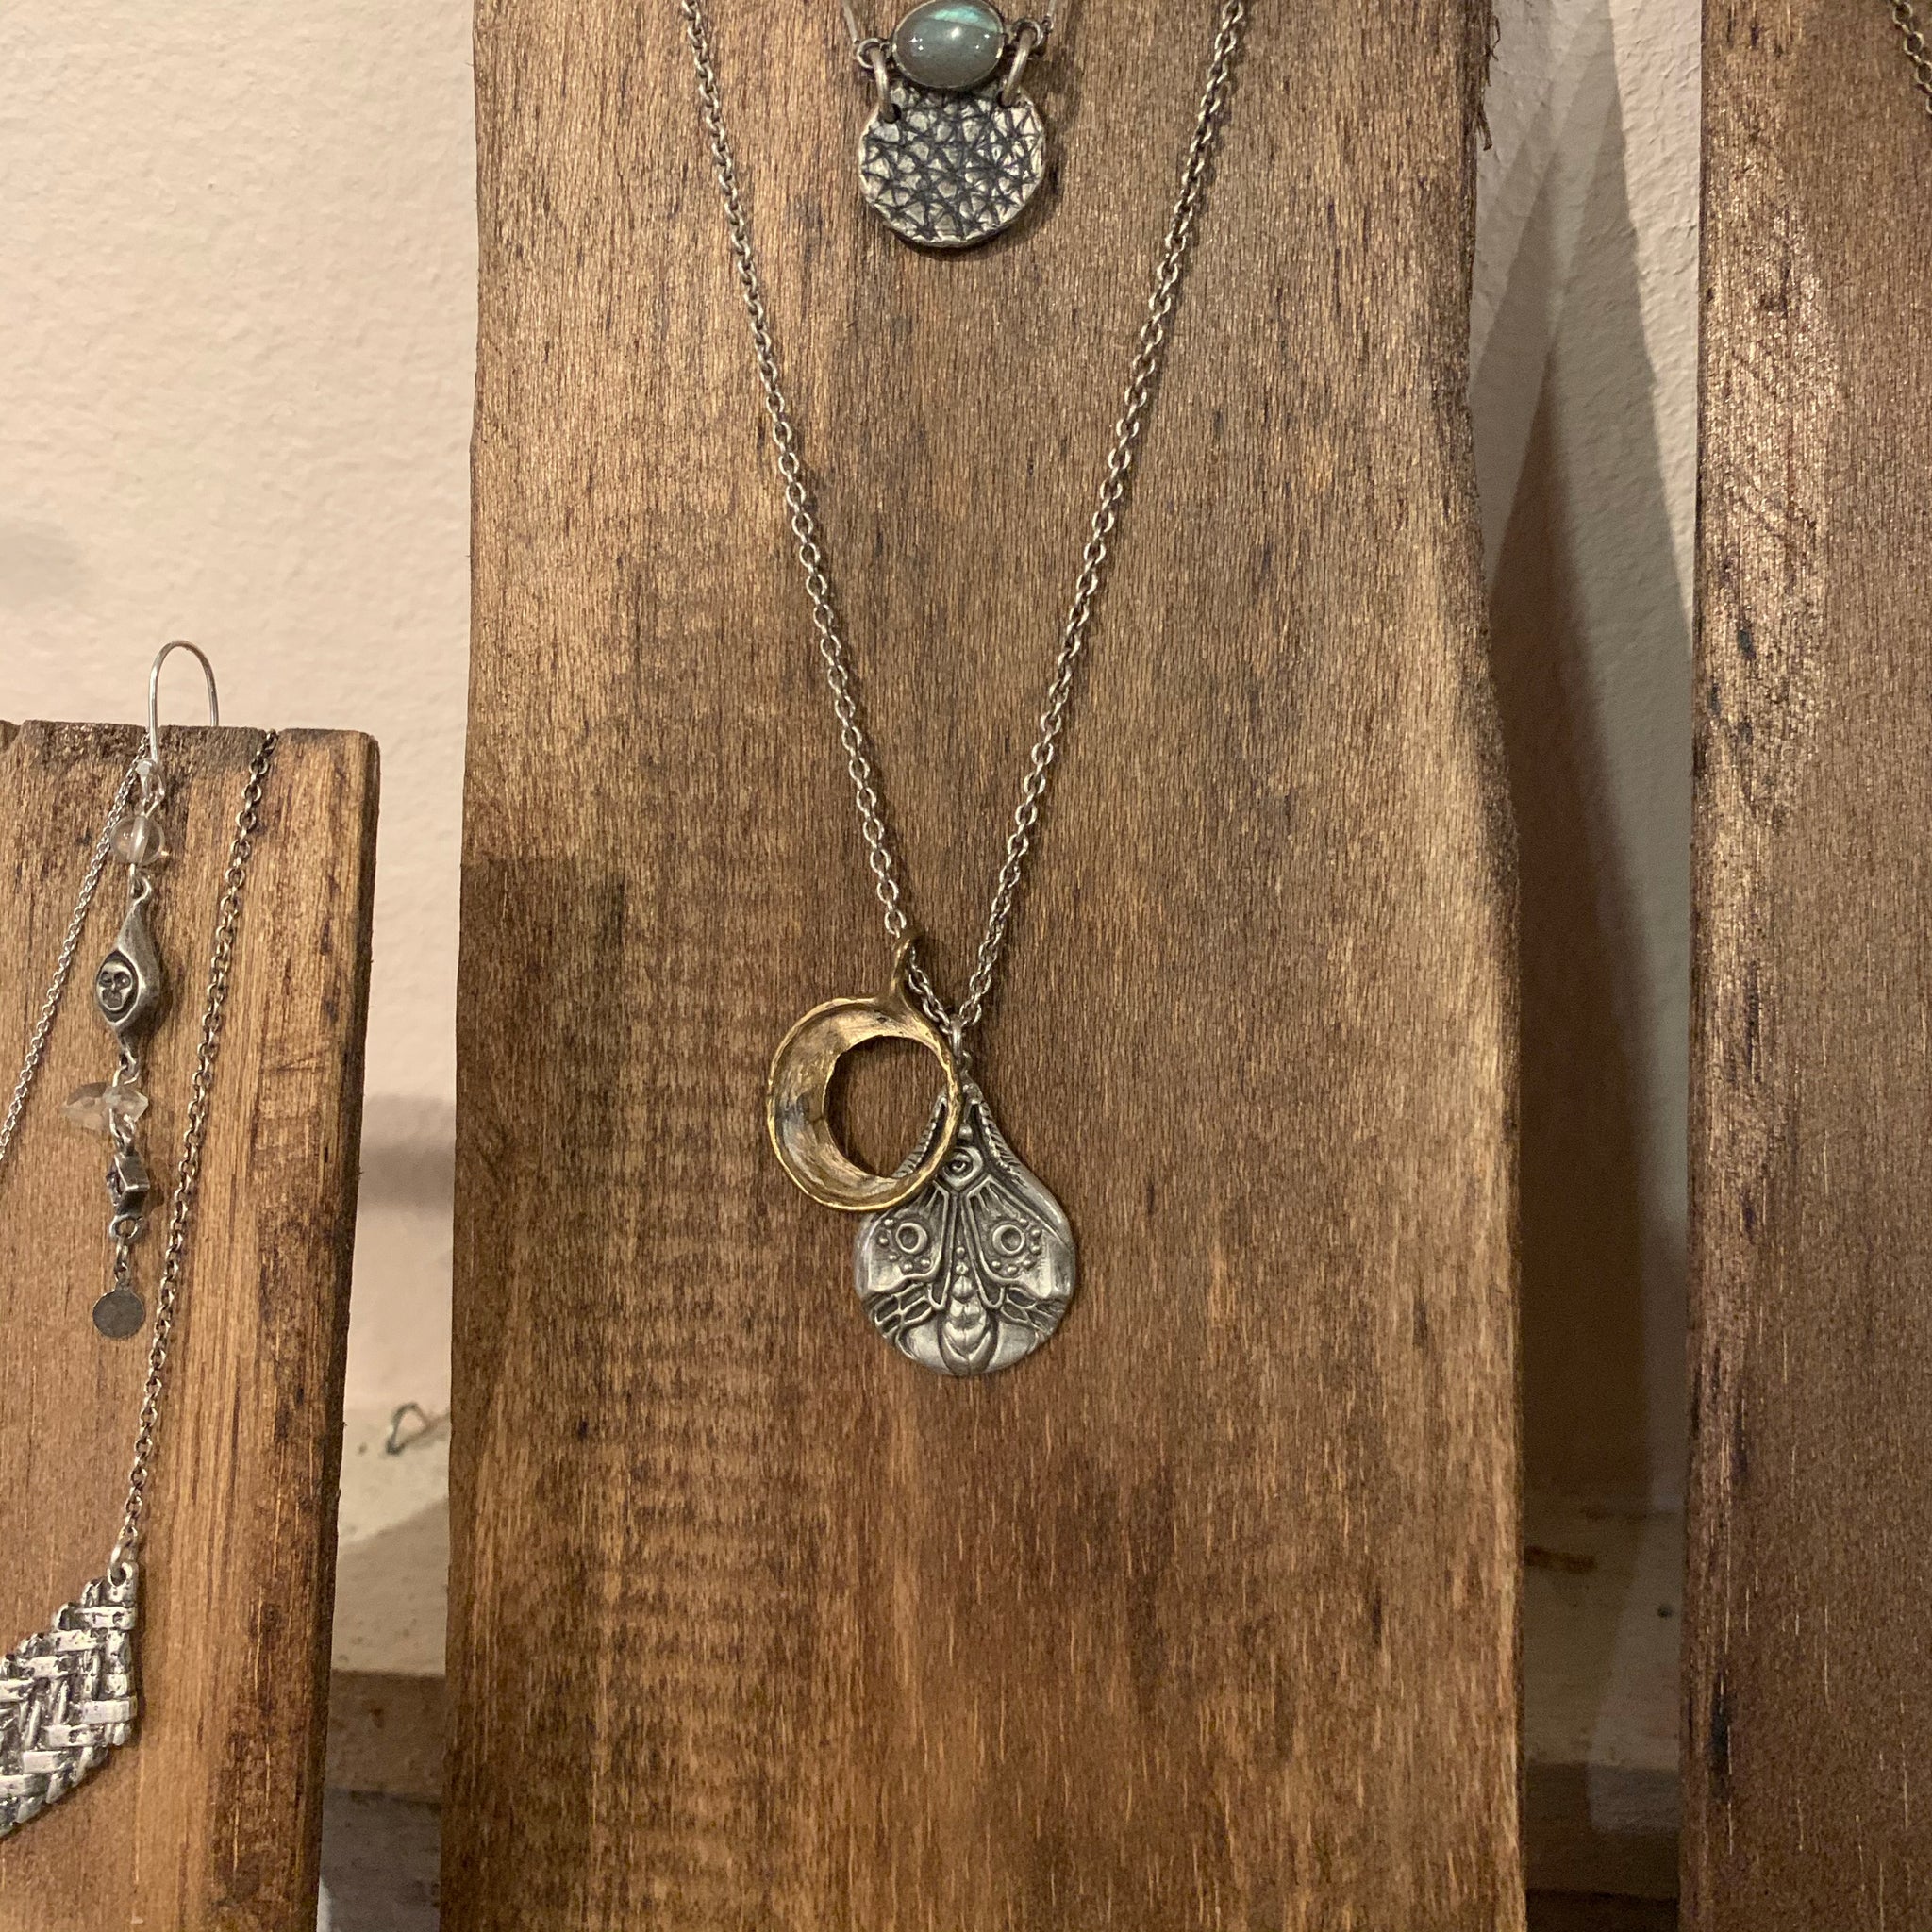 Unmarked Industries necklaces